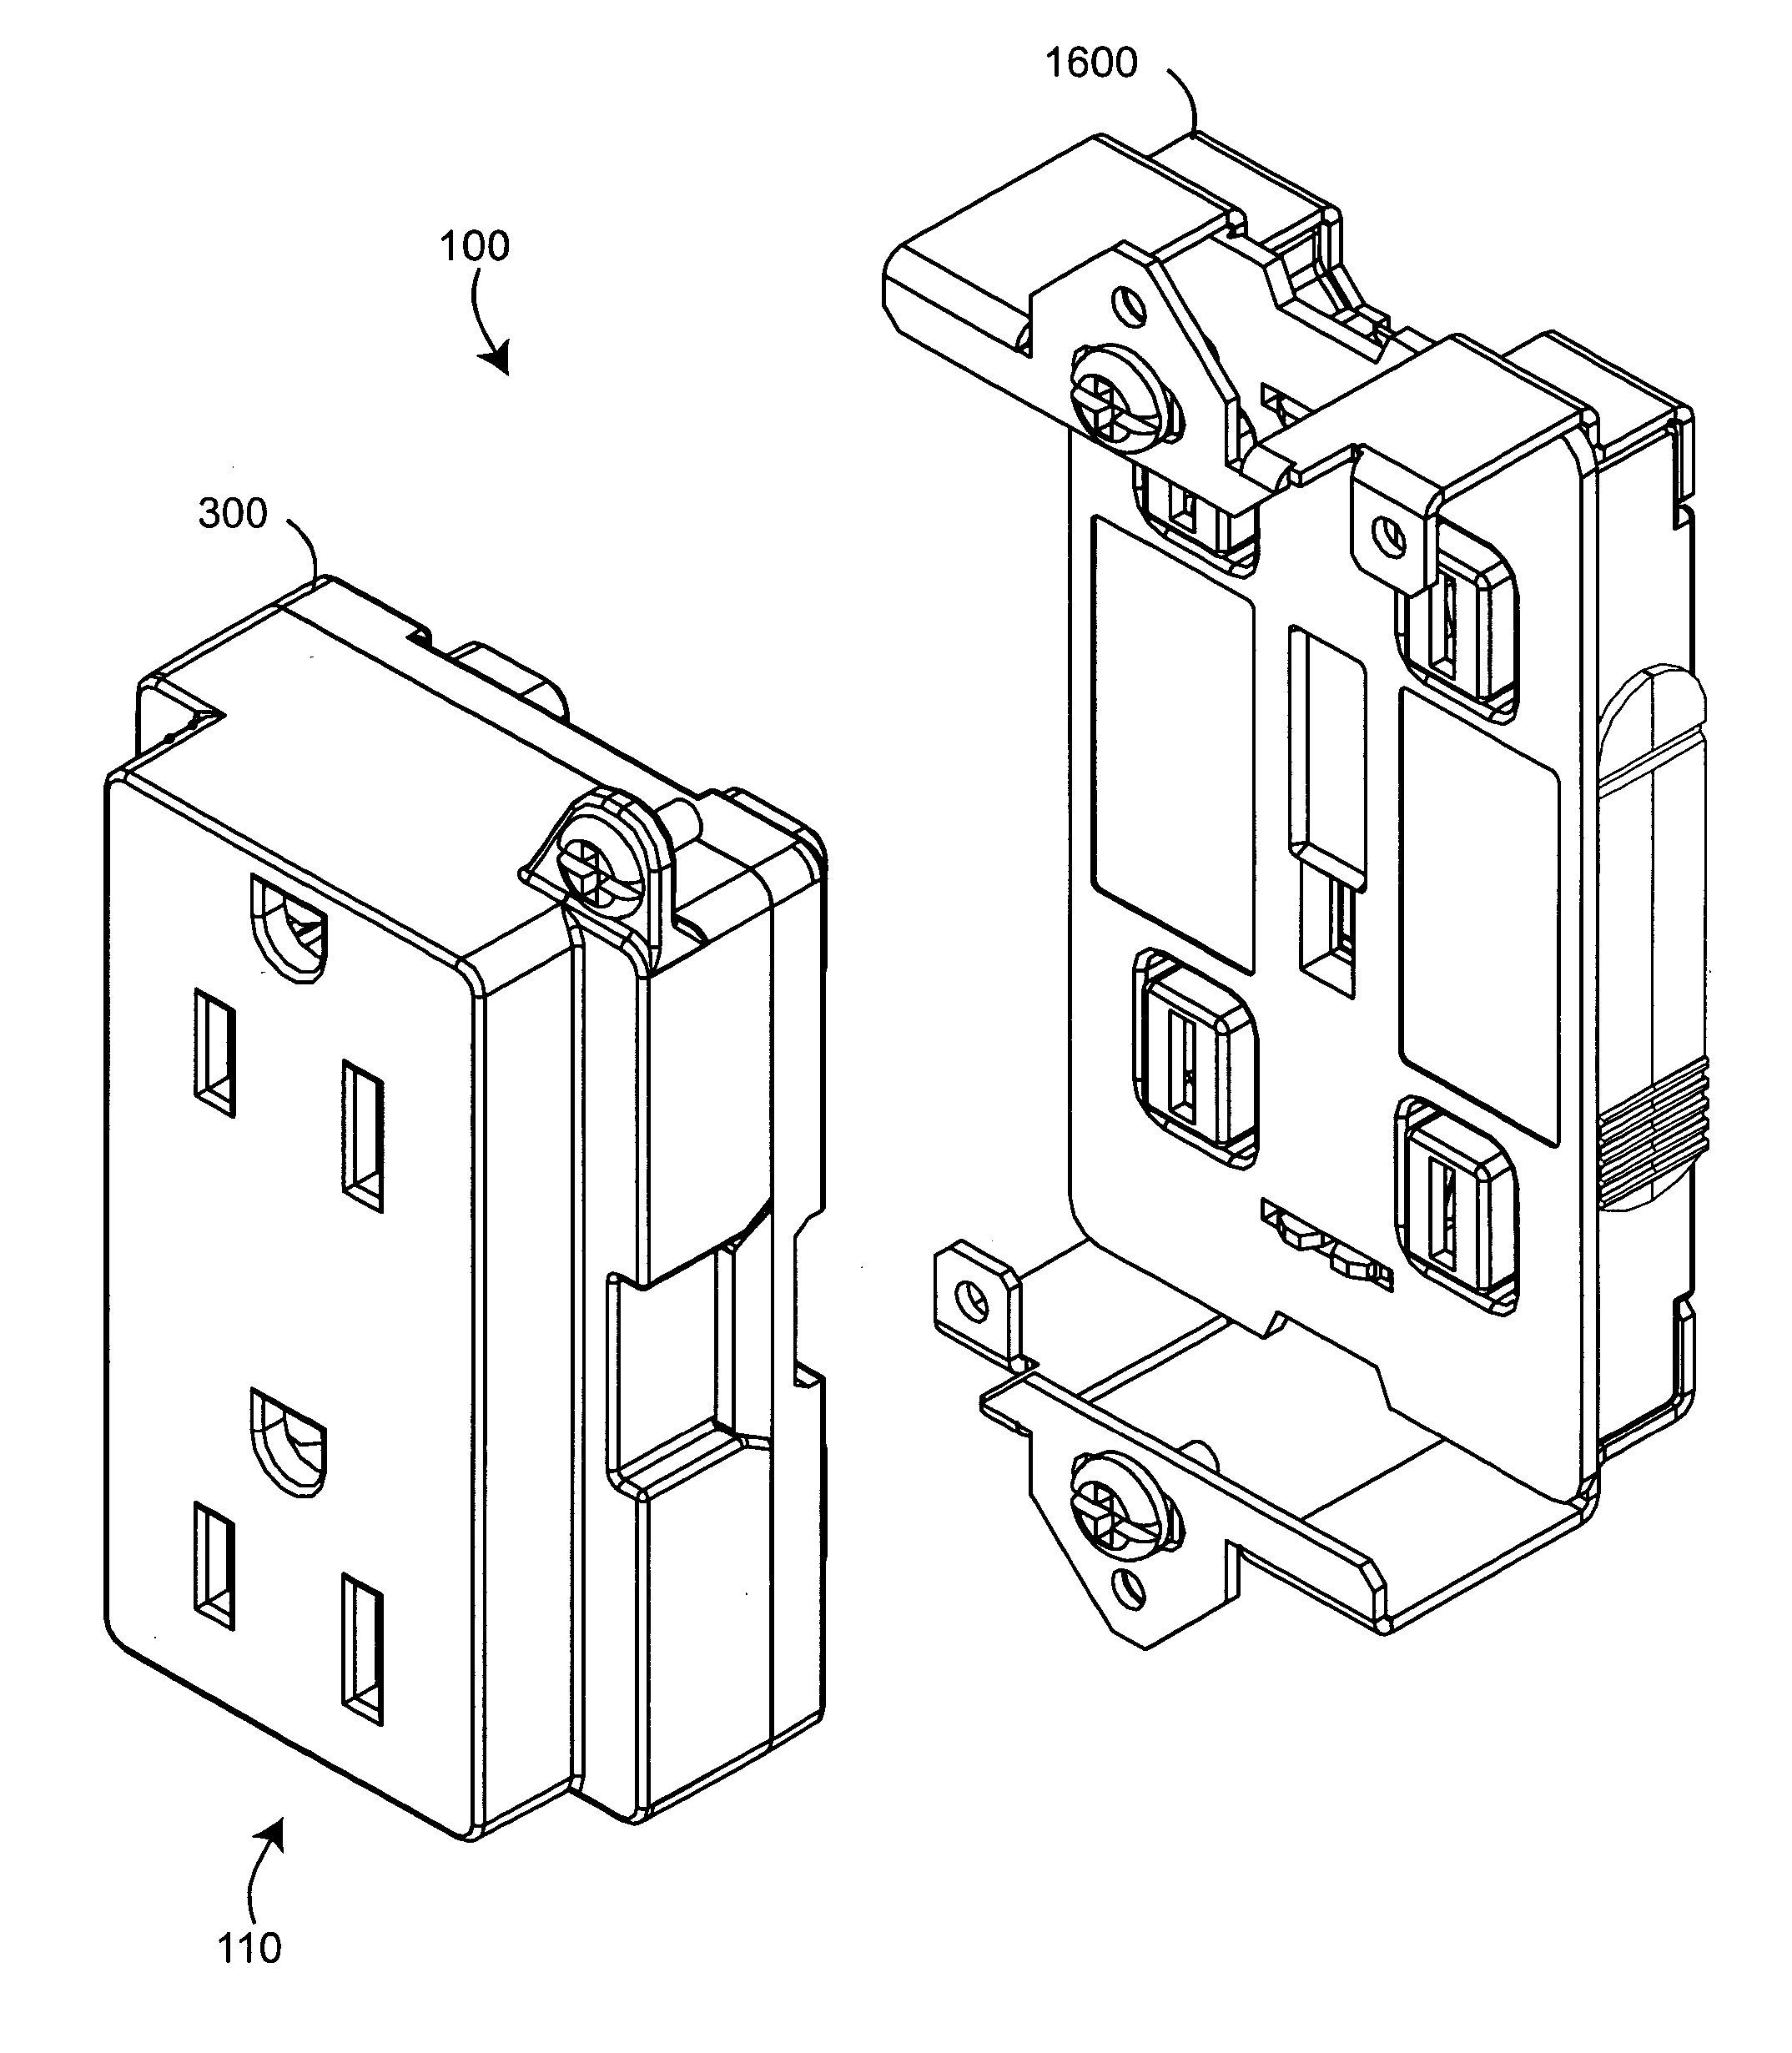 Electrical distribution functional module